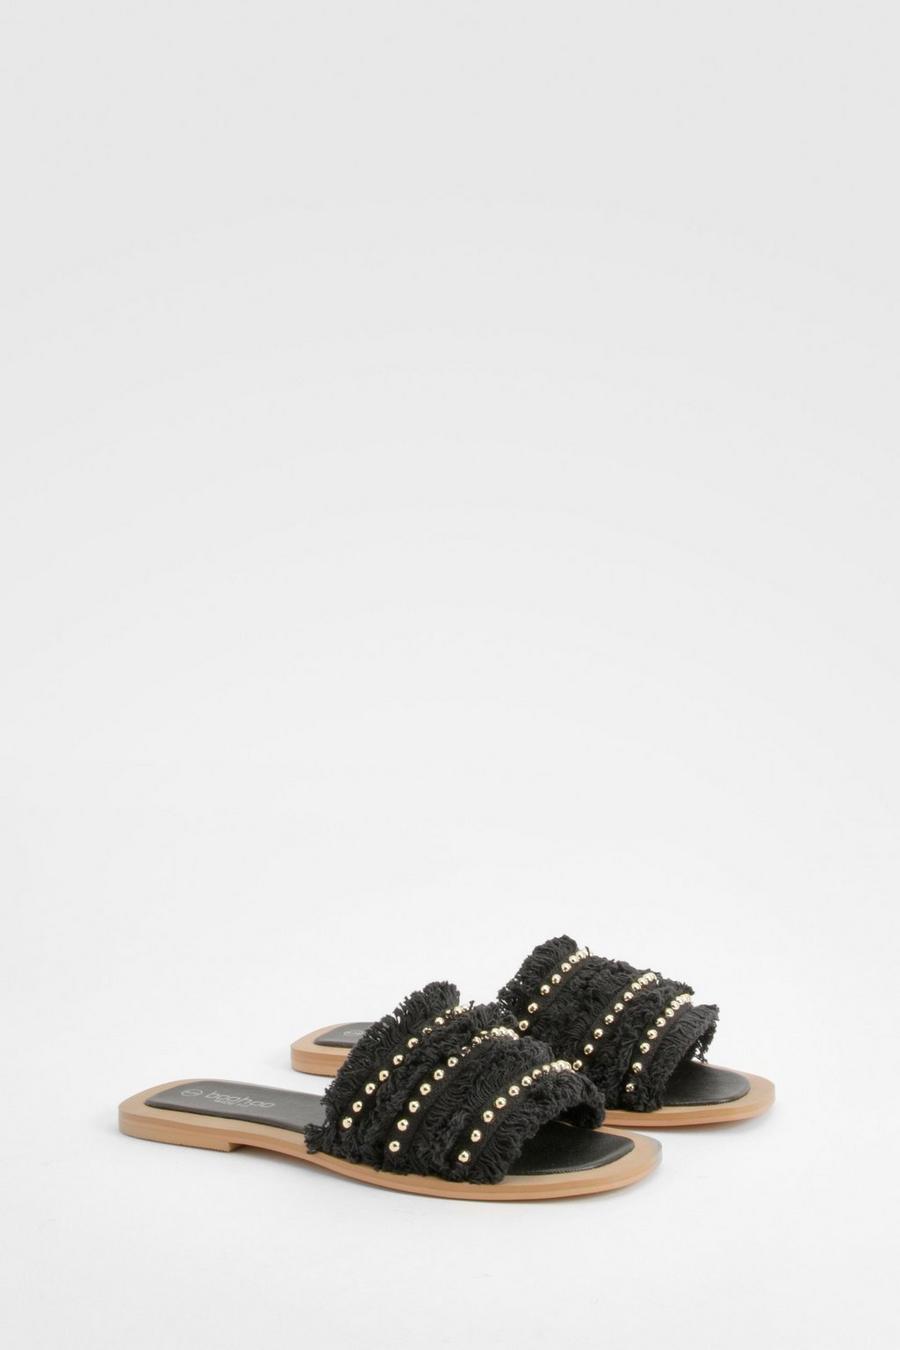 Black Wide Width Woven Studded Holiday Sandals